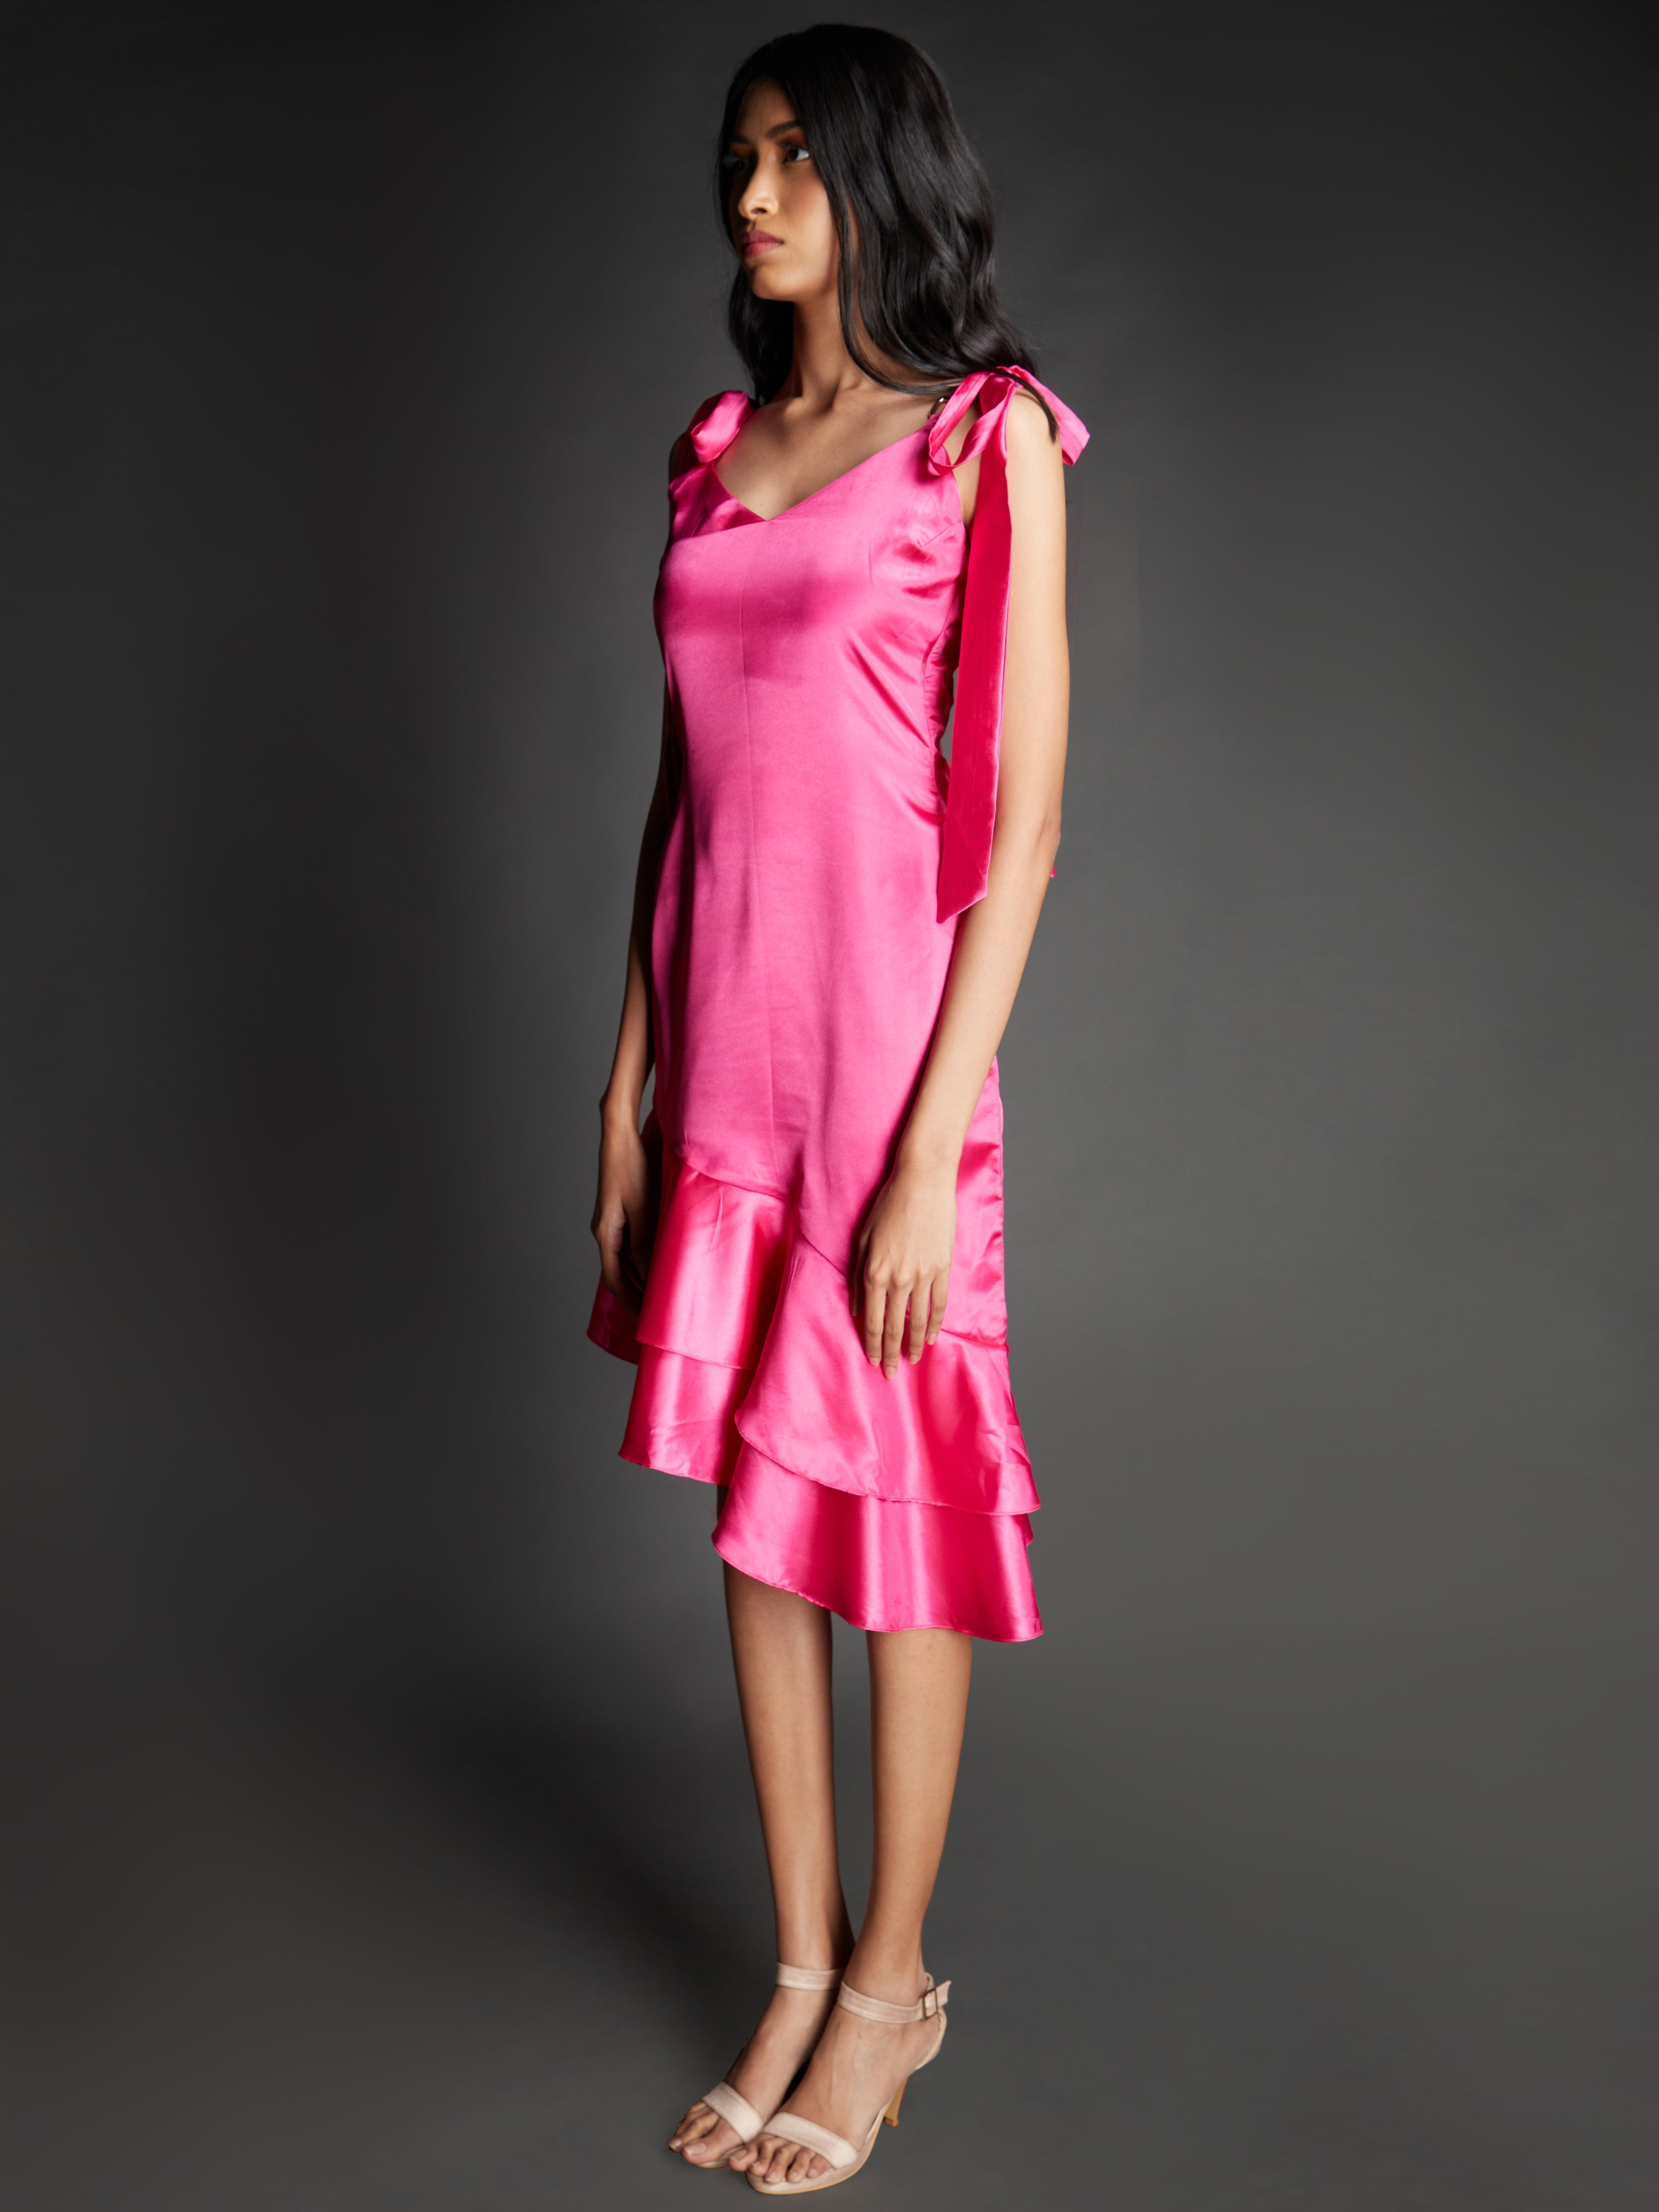 RUFFLE DRESS WITH SHOULDER TIE-UP